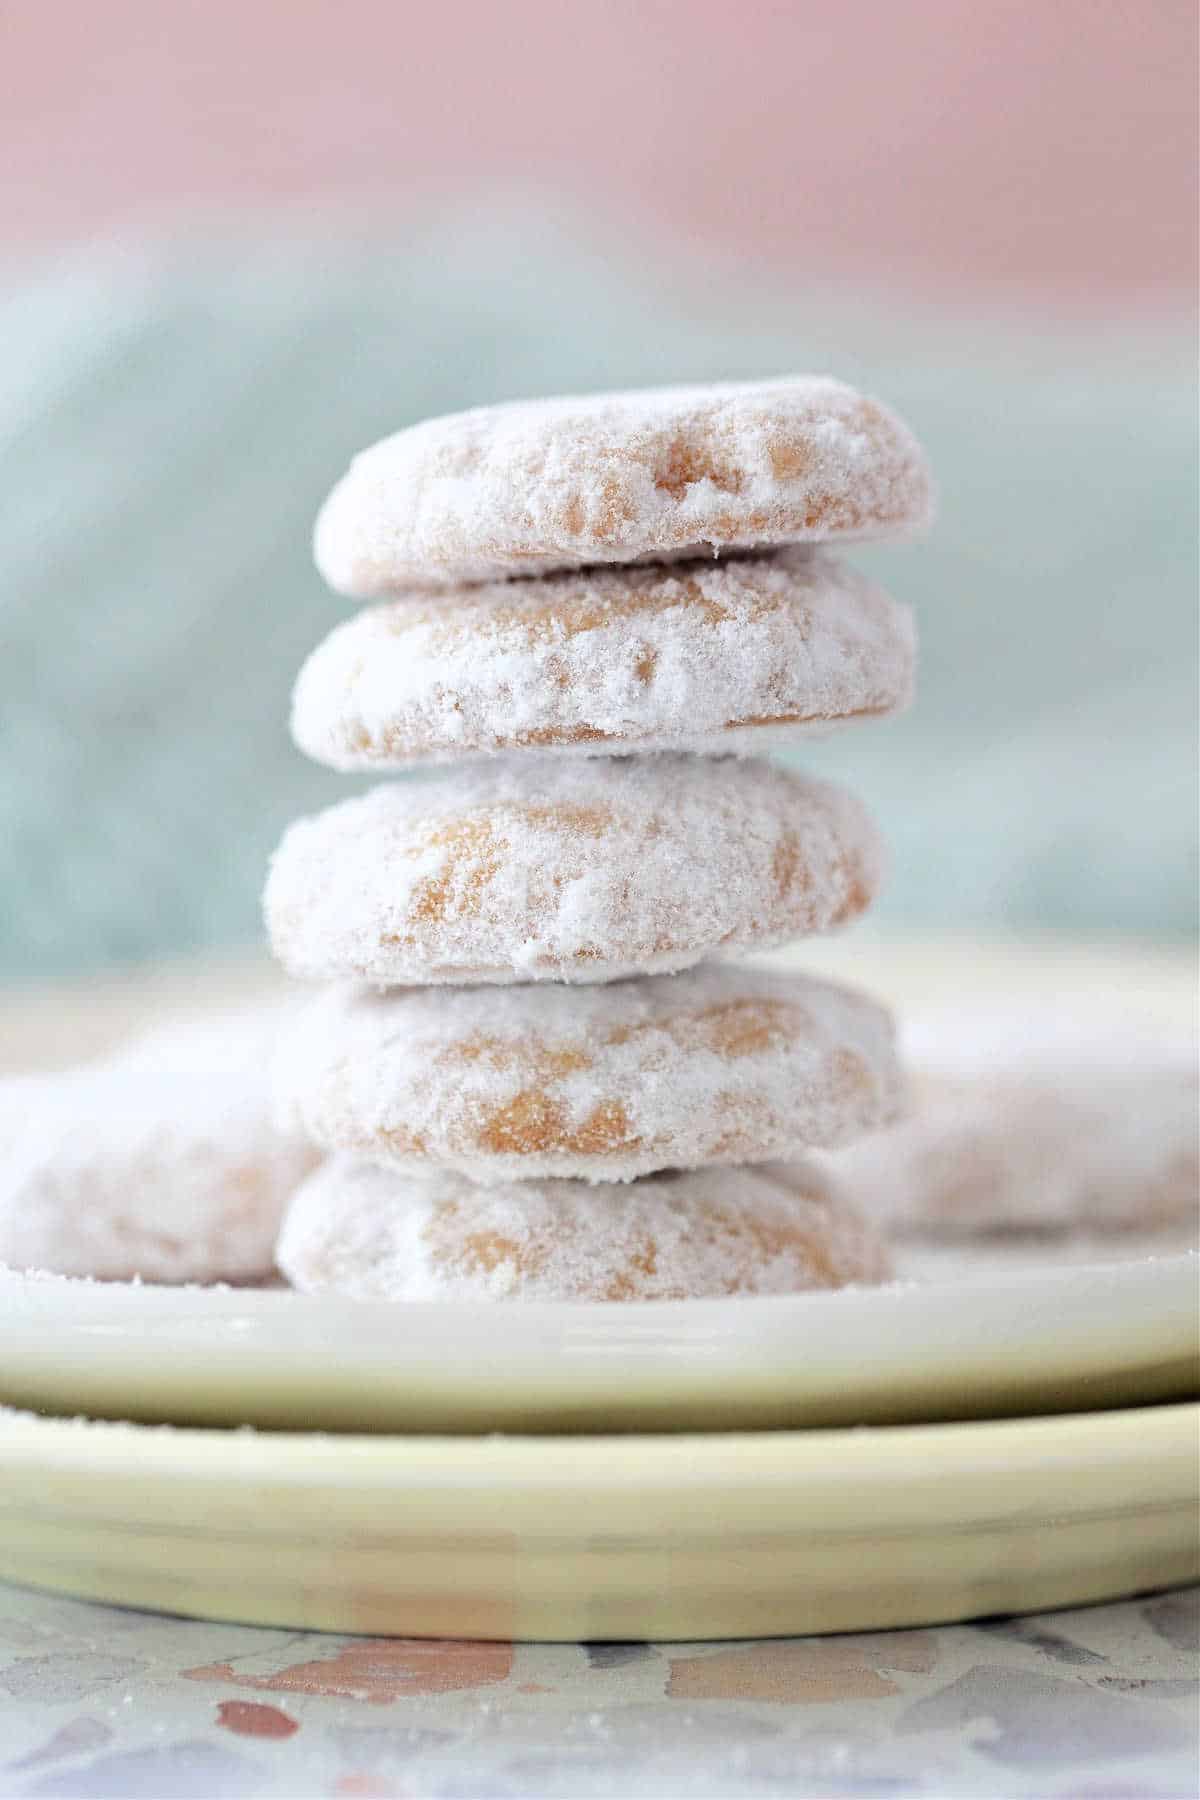 A stack of five small round cookies dusted with powdered sugar and shot on a pale yellow plate against a pale green and peach background.